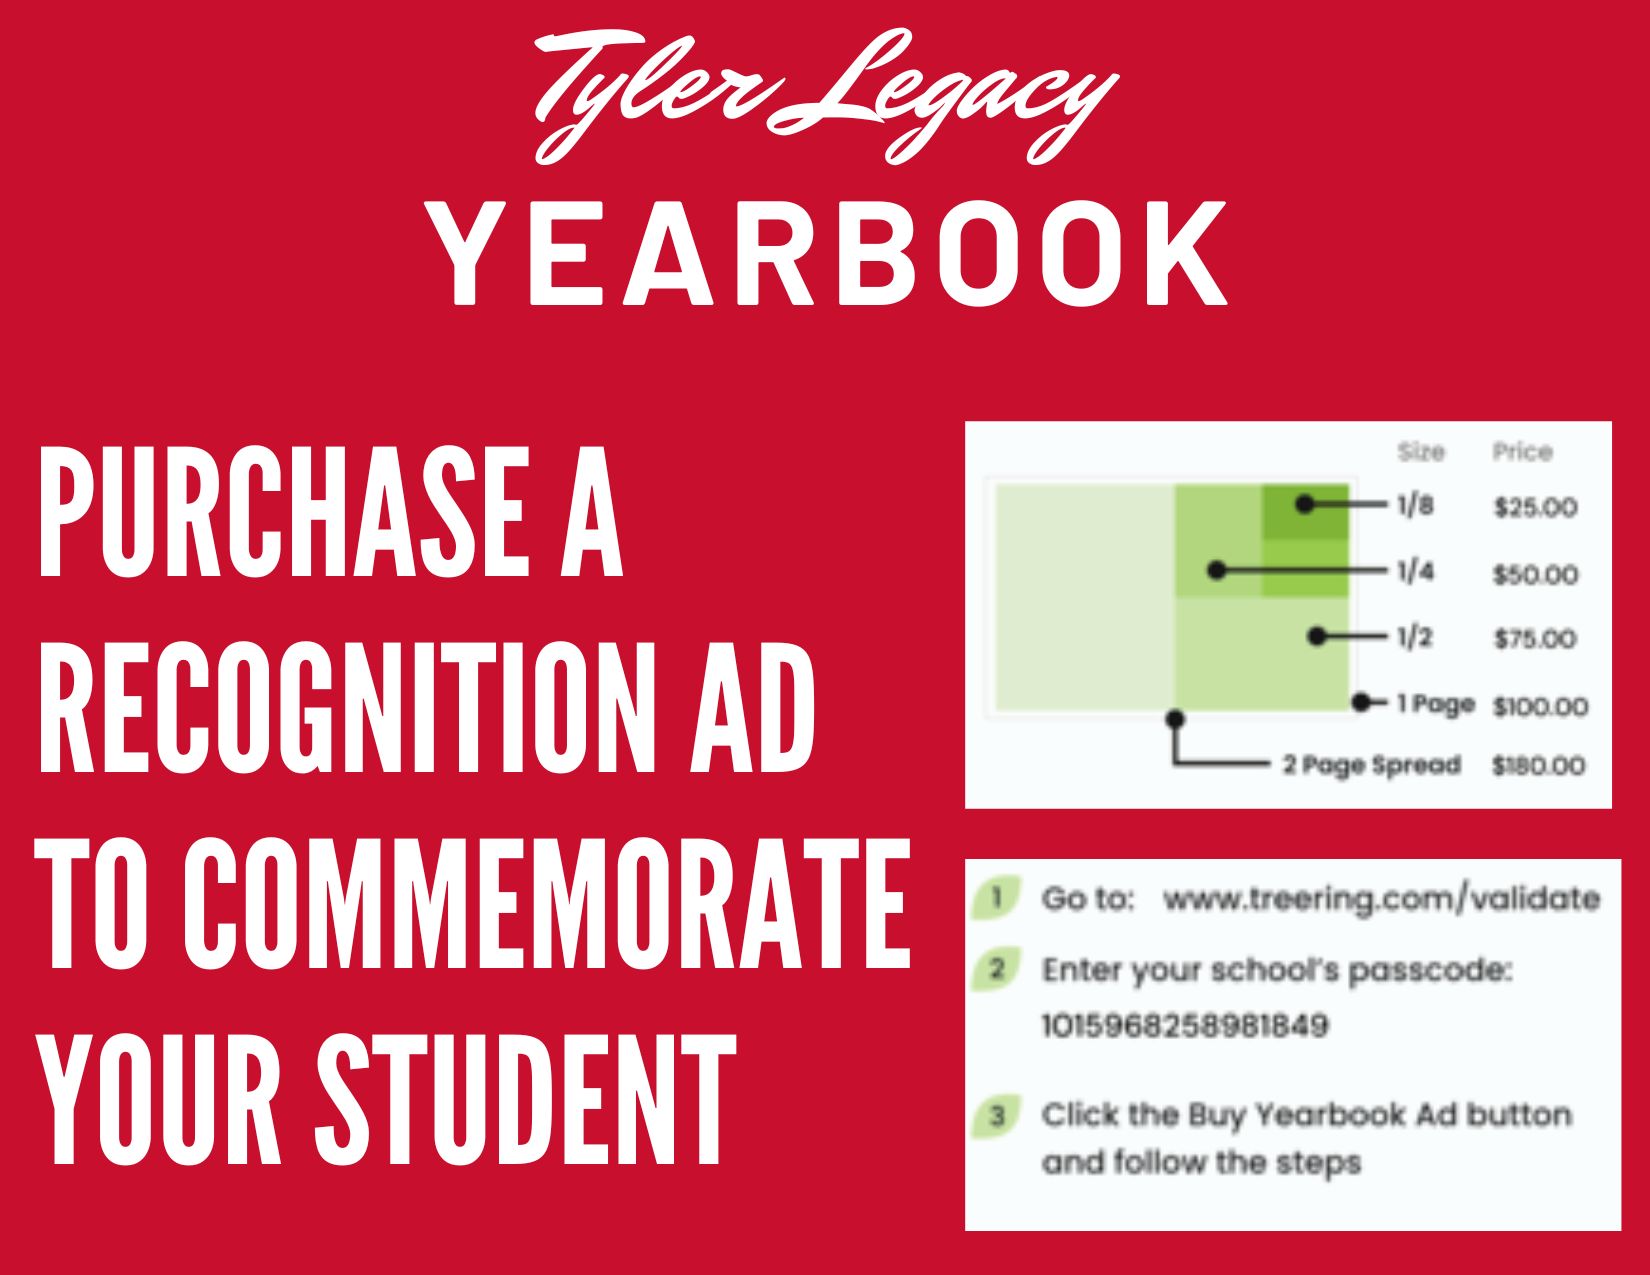 Tyler Legacy Yearbook recognition Ads